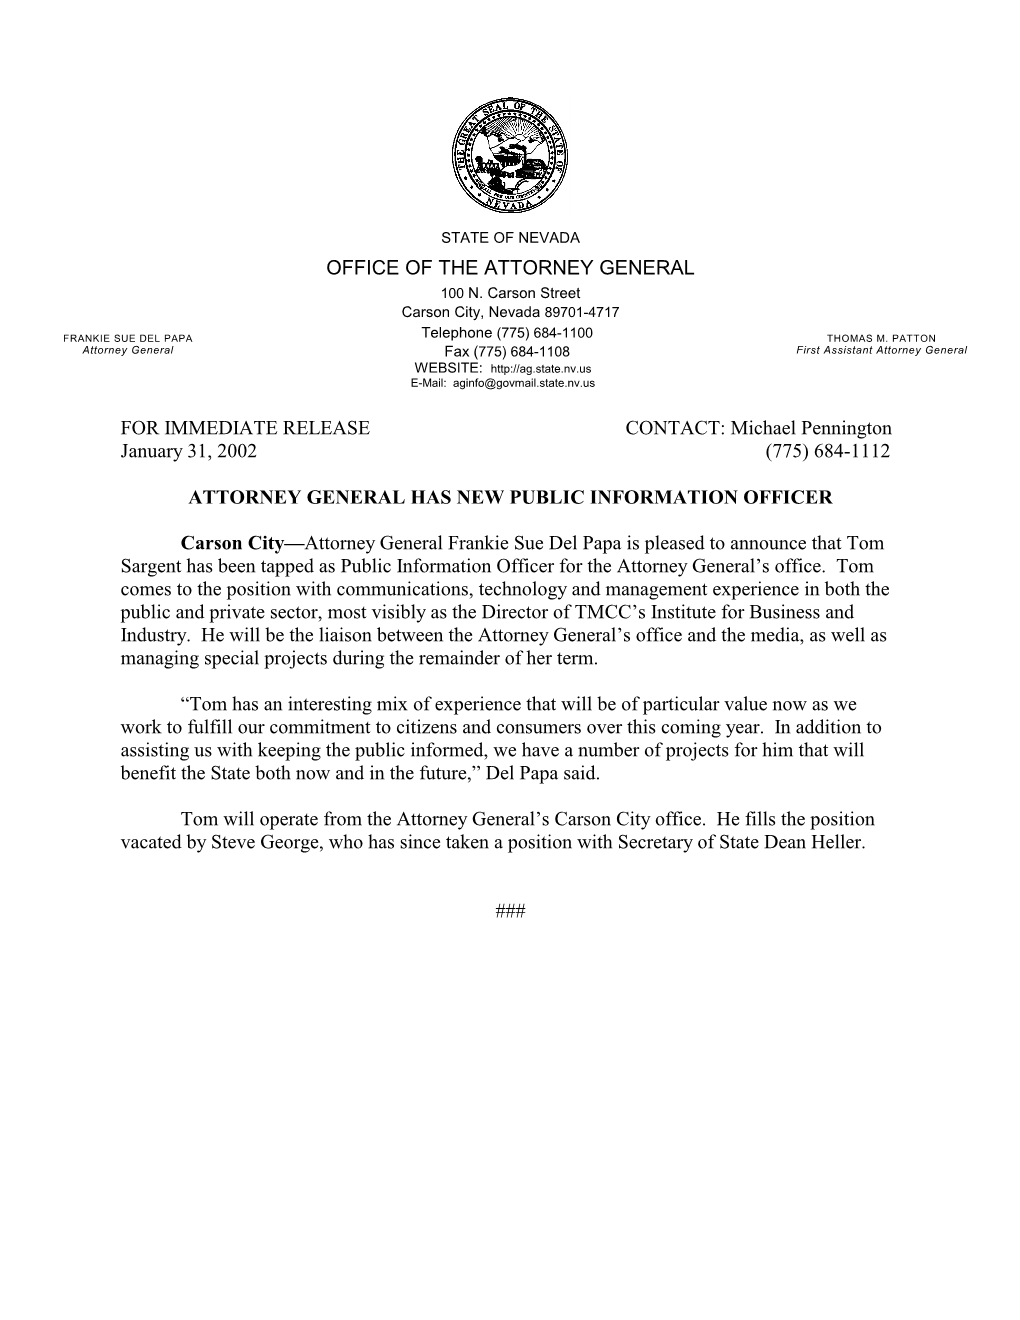 OFFICE of the ATTORNEY GENERAL for IMMEDIATE RELEASE CONTACT: Michael Pennington January 31, 2002 (775) 684-1112 ATTORNEY GENERA